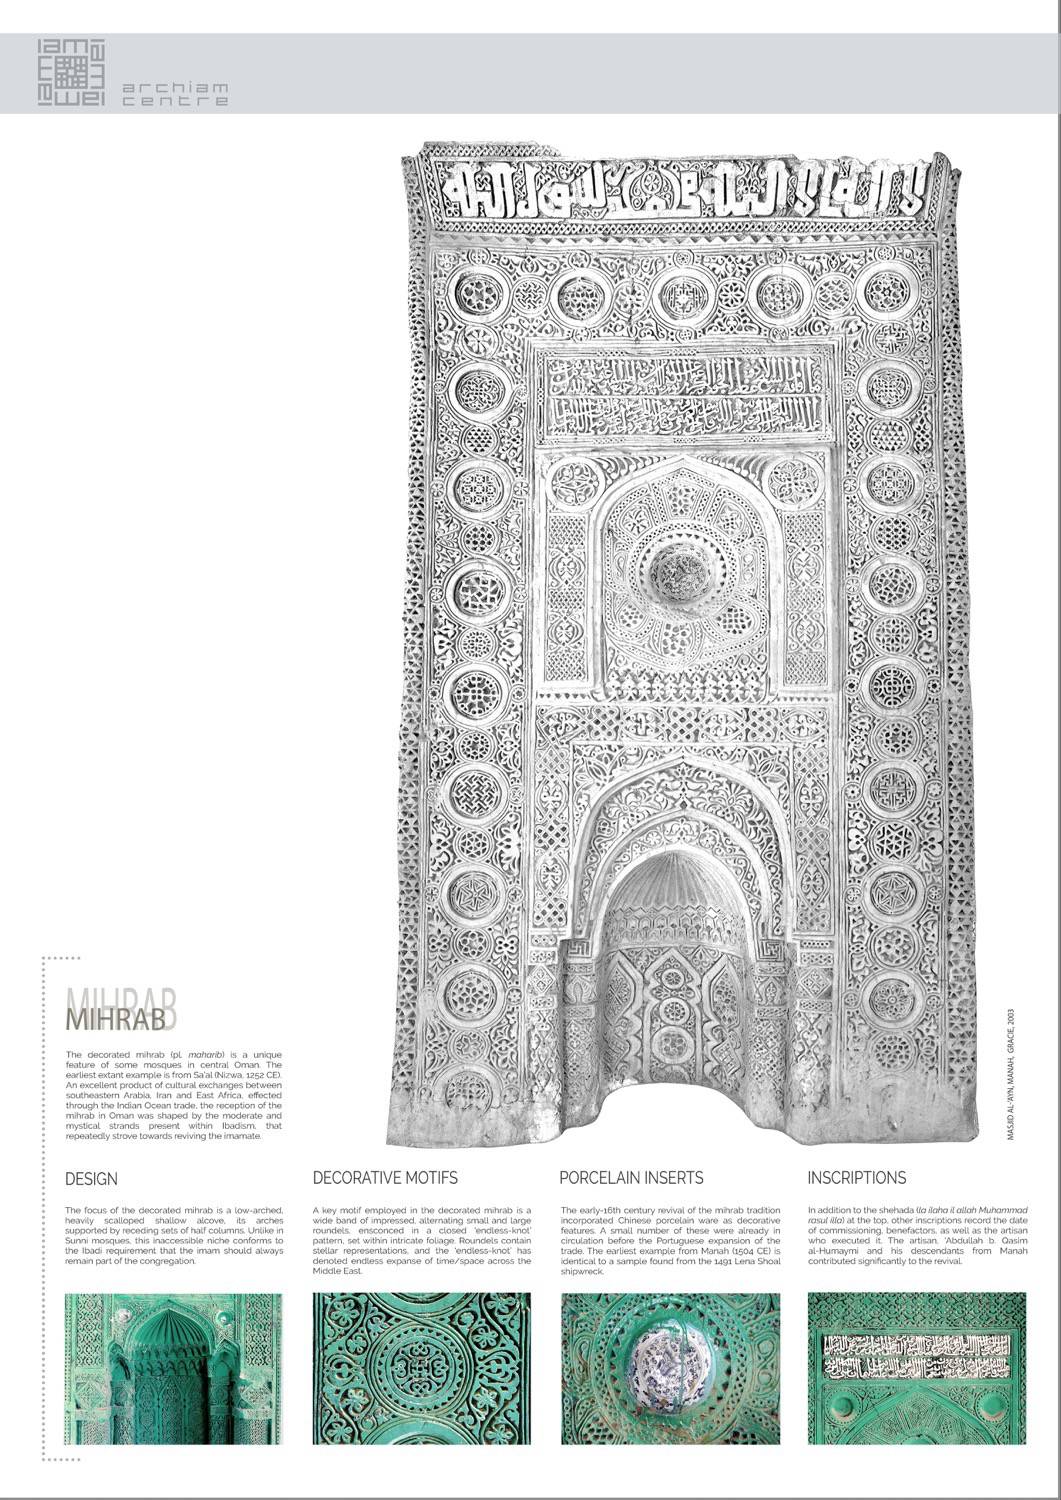  Centre for the Study of Architecture and Cultural Heritage of India, Arabia and the Maghreb - Panel 3 of 4